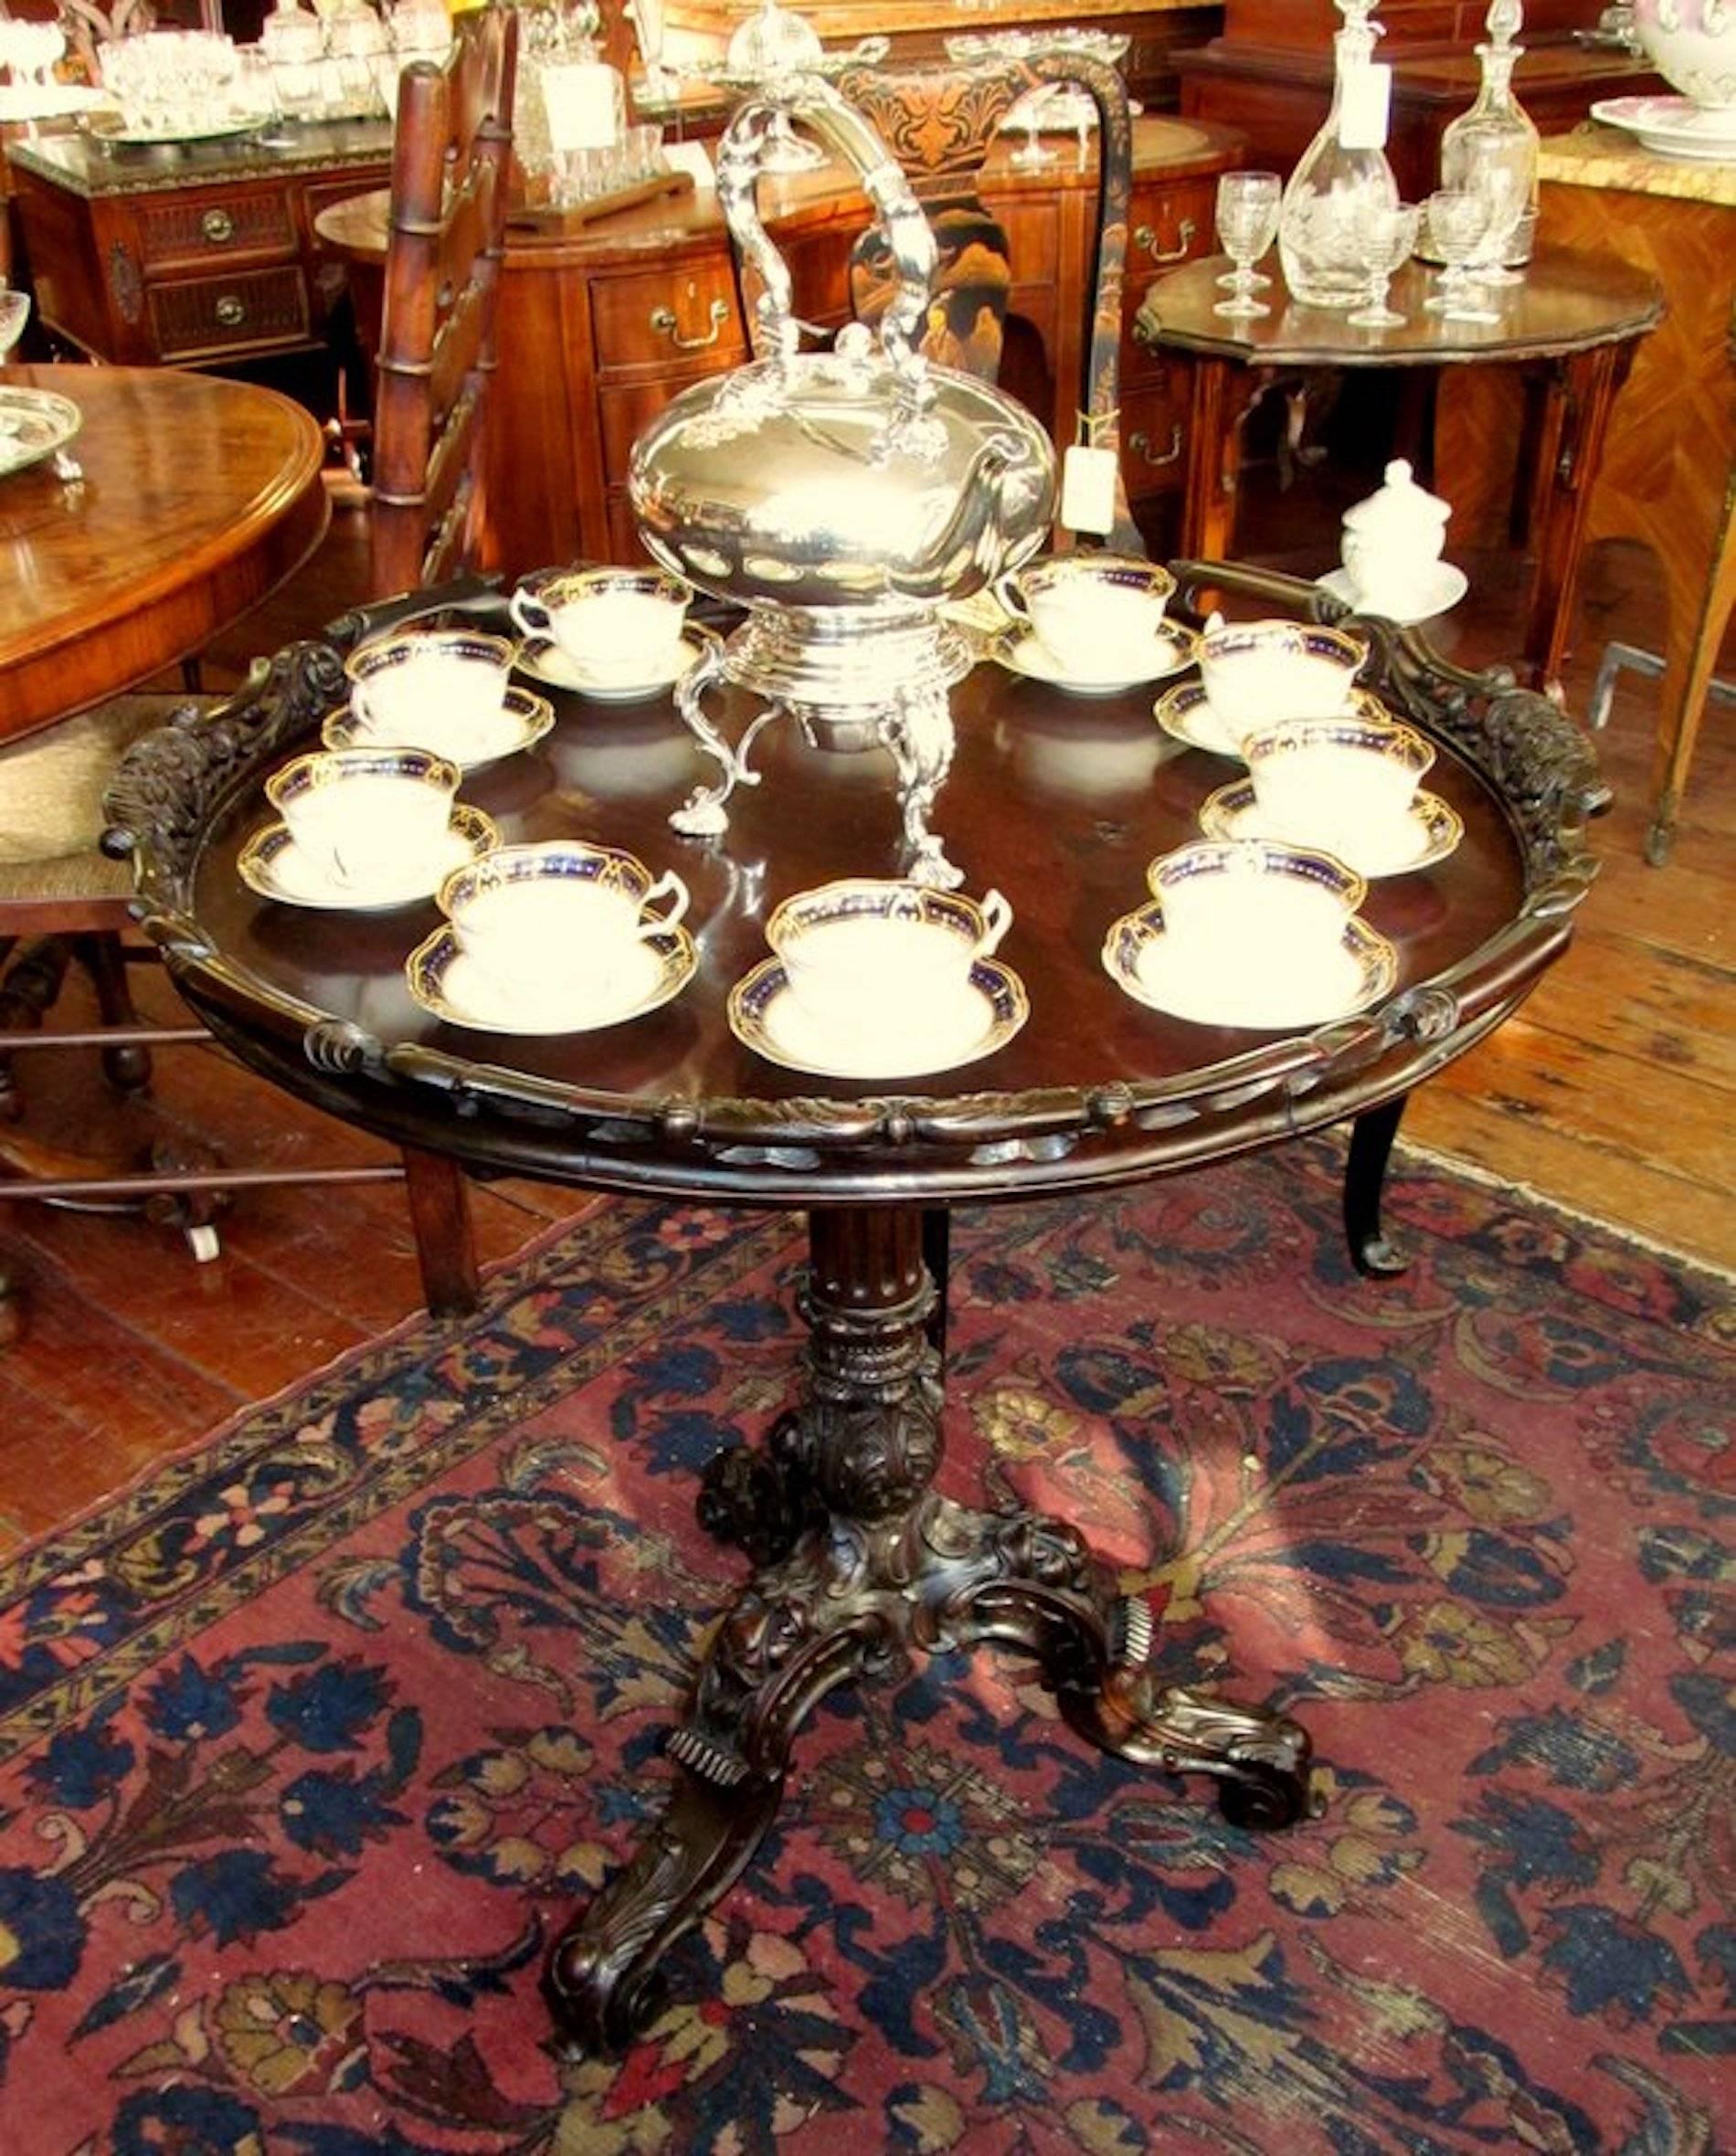 Exceptional quality antique Irish Chippendale style profusely hand-carved solid mahogany tilt-top circular tripod tea table or occasional table

Please note extraordinary profusely carved pedestal evidencing a gorgeous acanthus leaf hand-carved urn